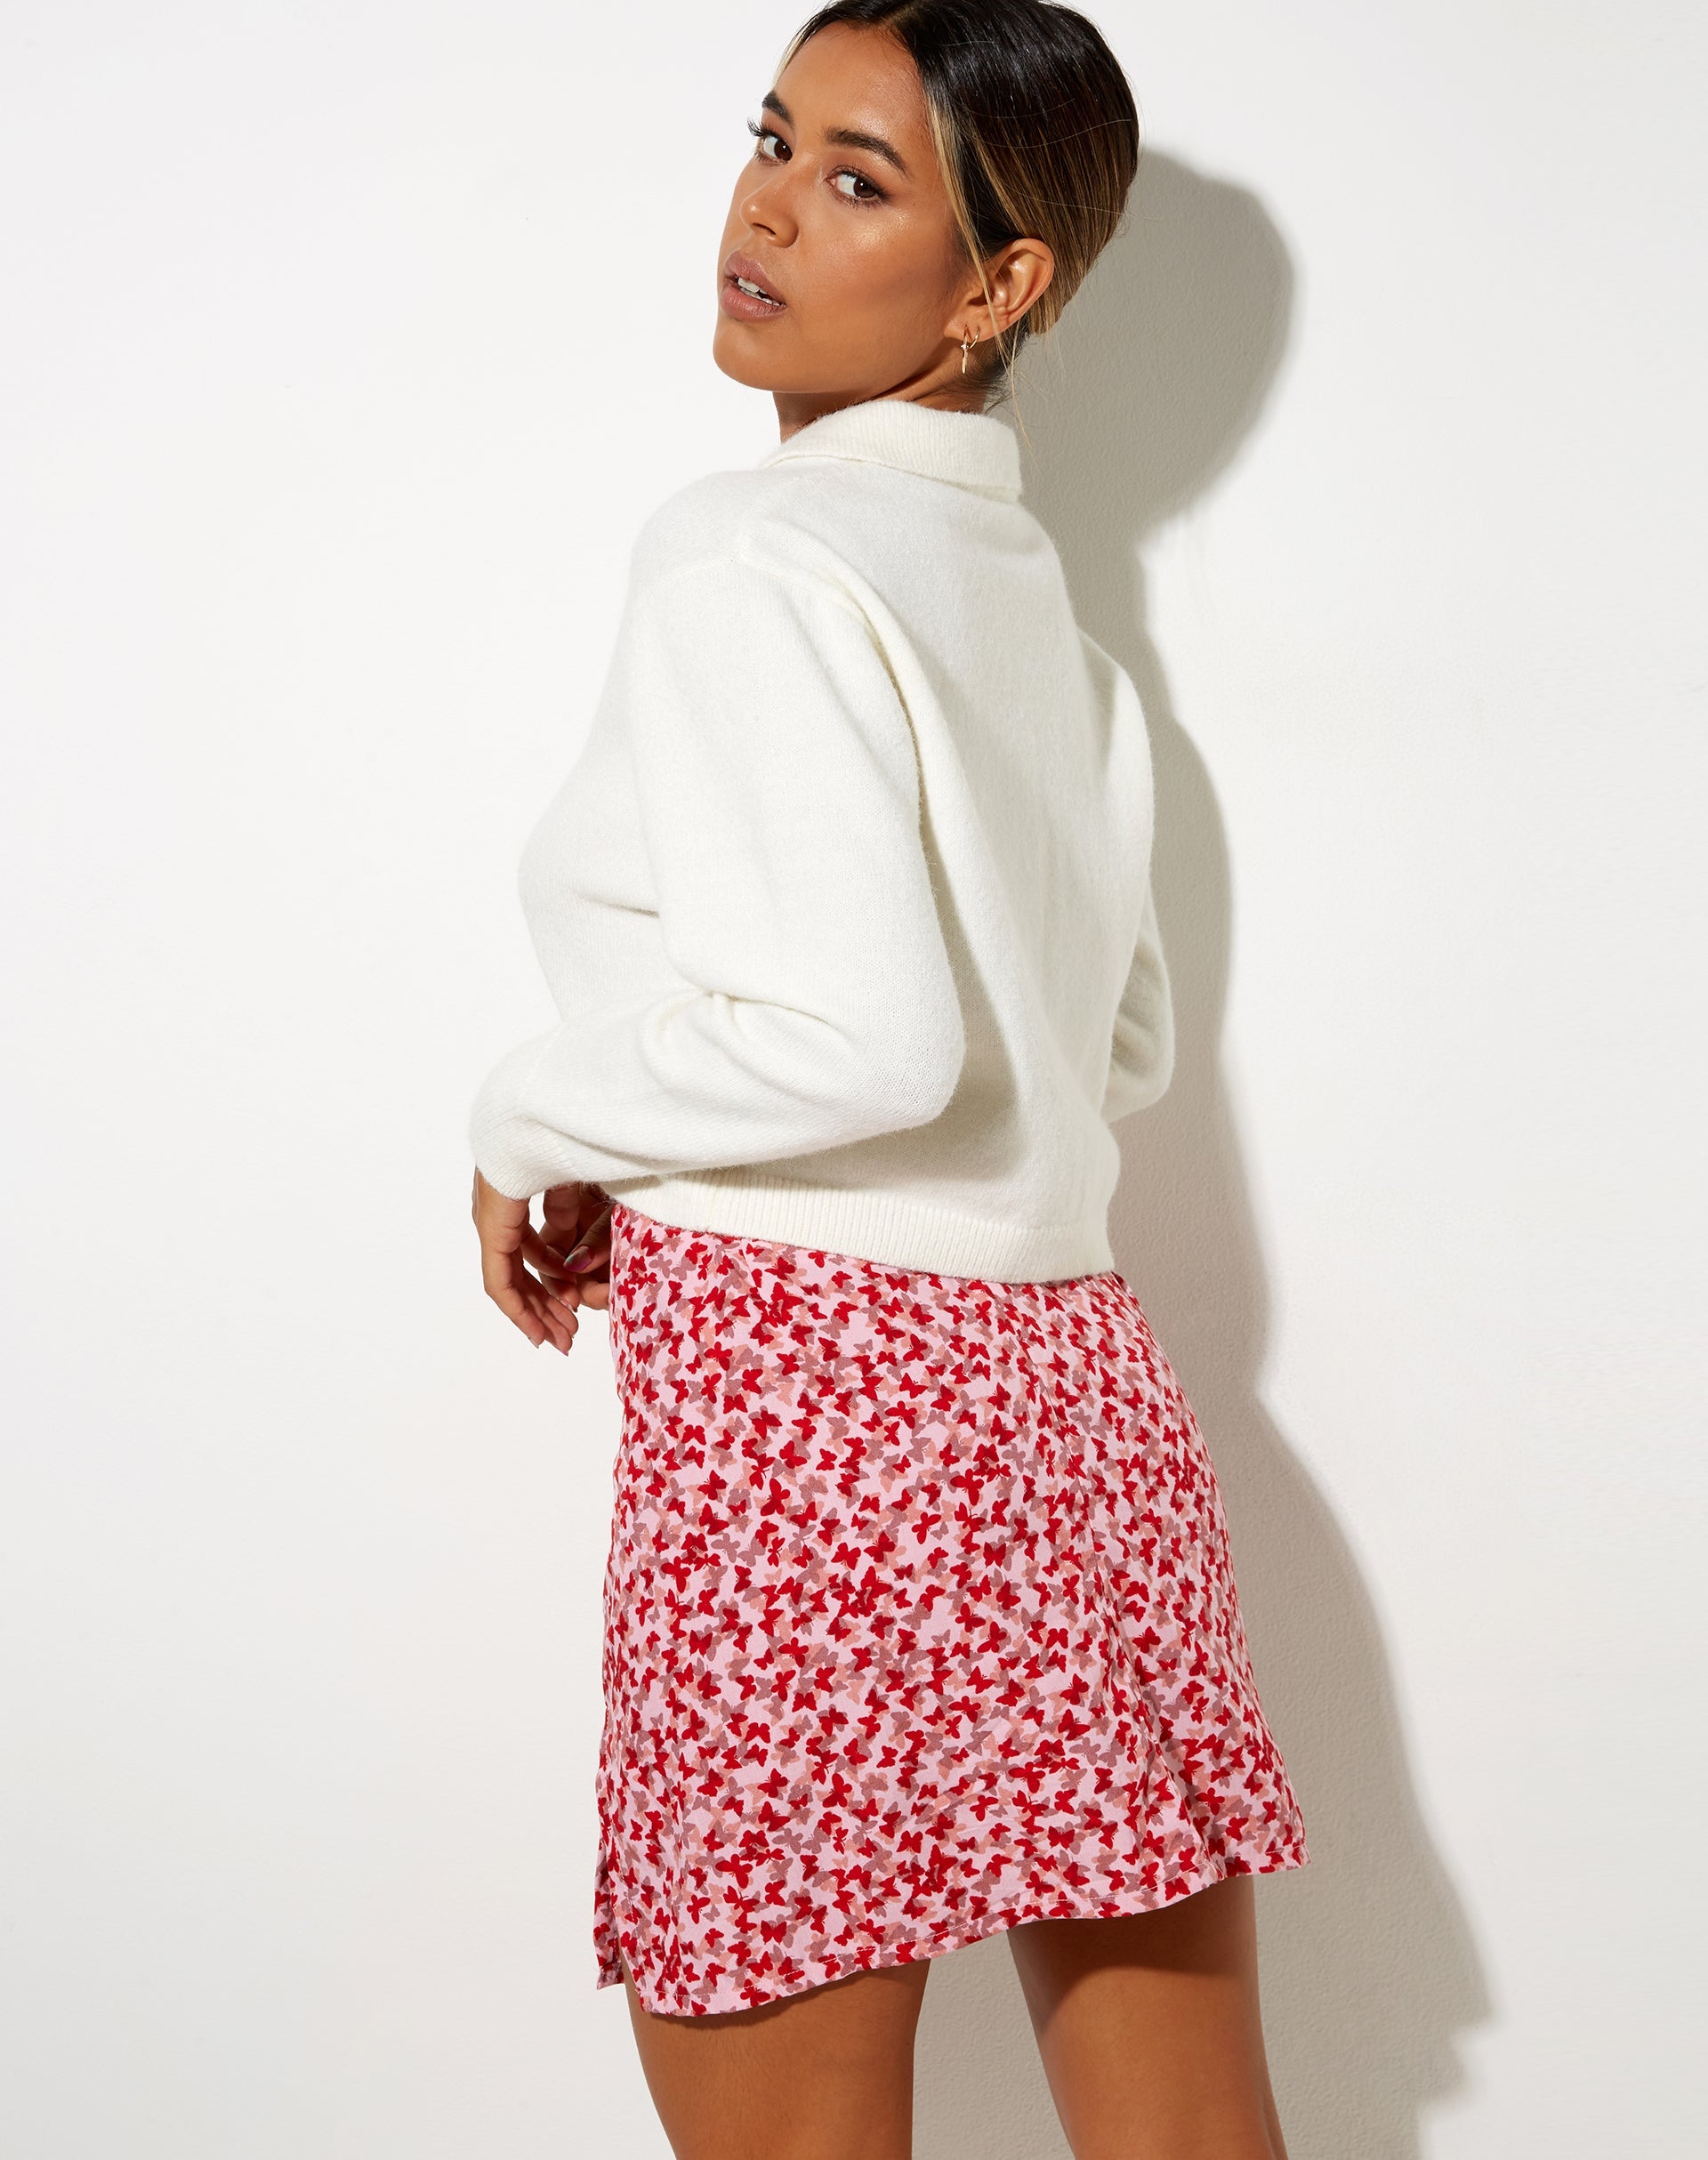 Image of Sheny Mini Skirt in Ditsy Butterfly Peach and Red